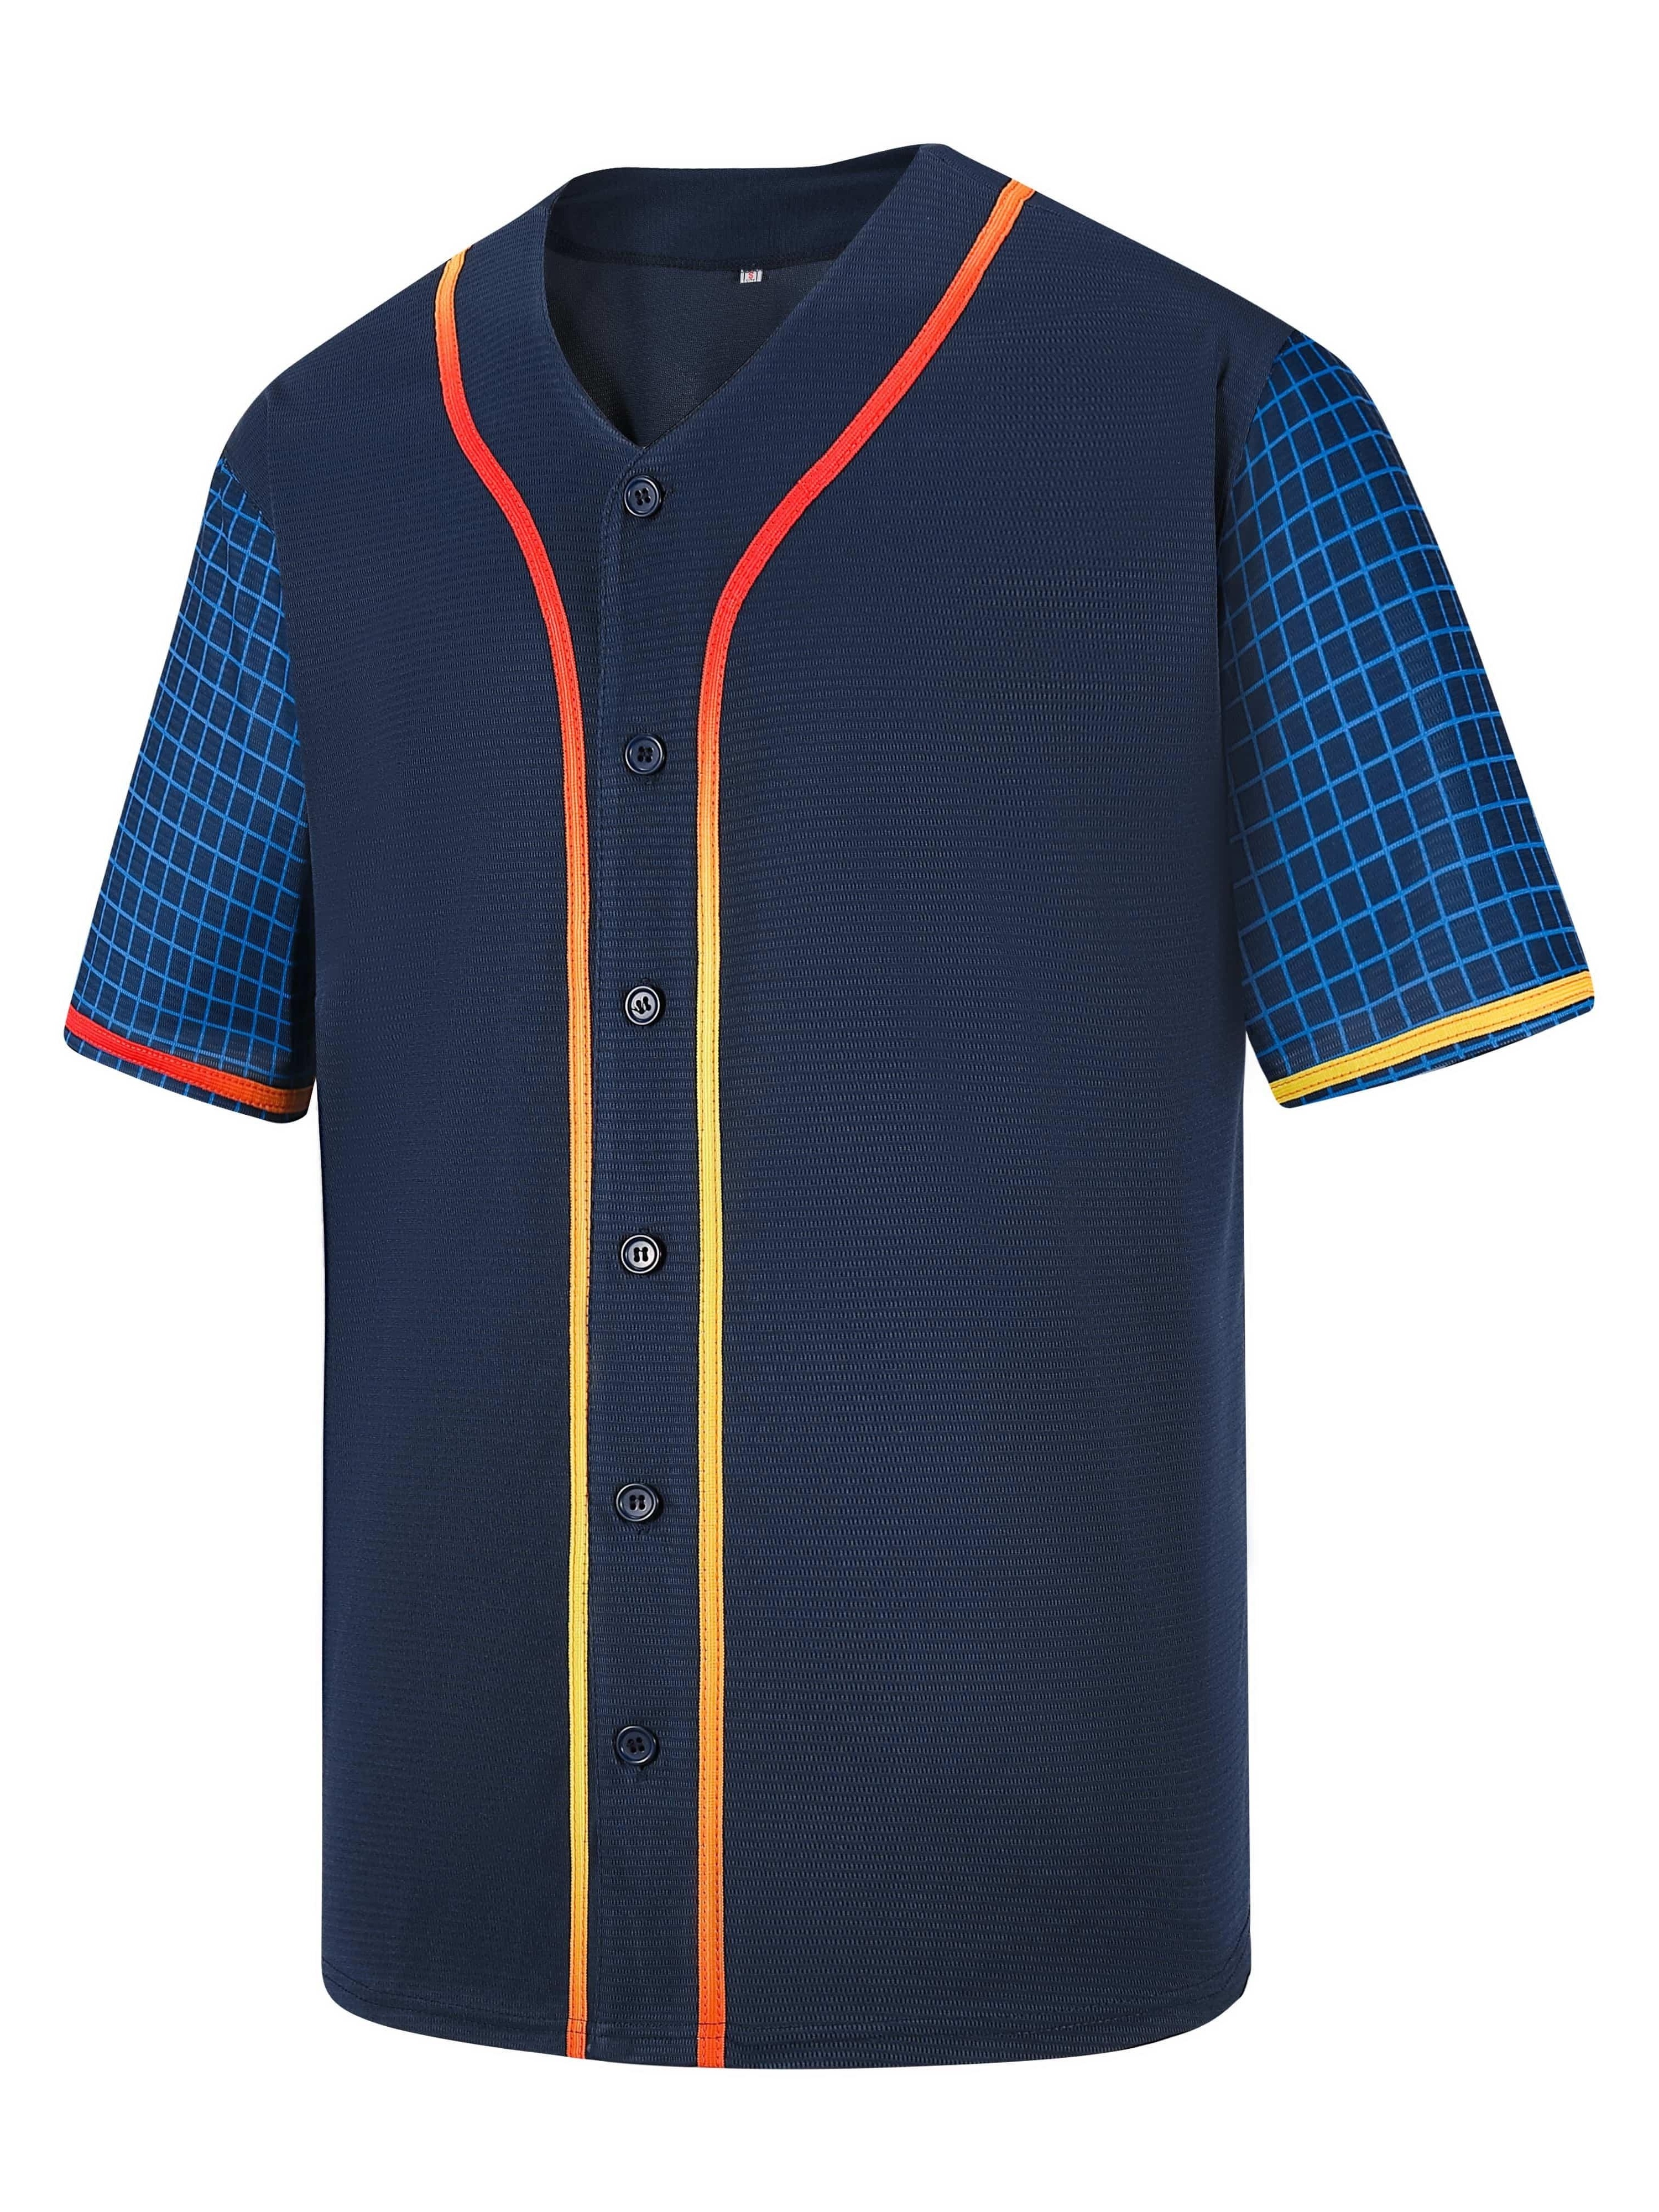 Men's Baseball Jersey, Fashion Baseball Shirt, Breathable Button Up Sports Uniform for Couples Training Competition,Temu